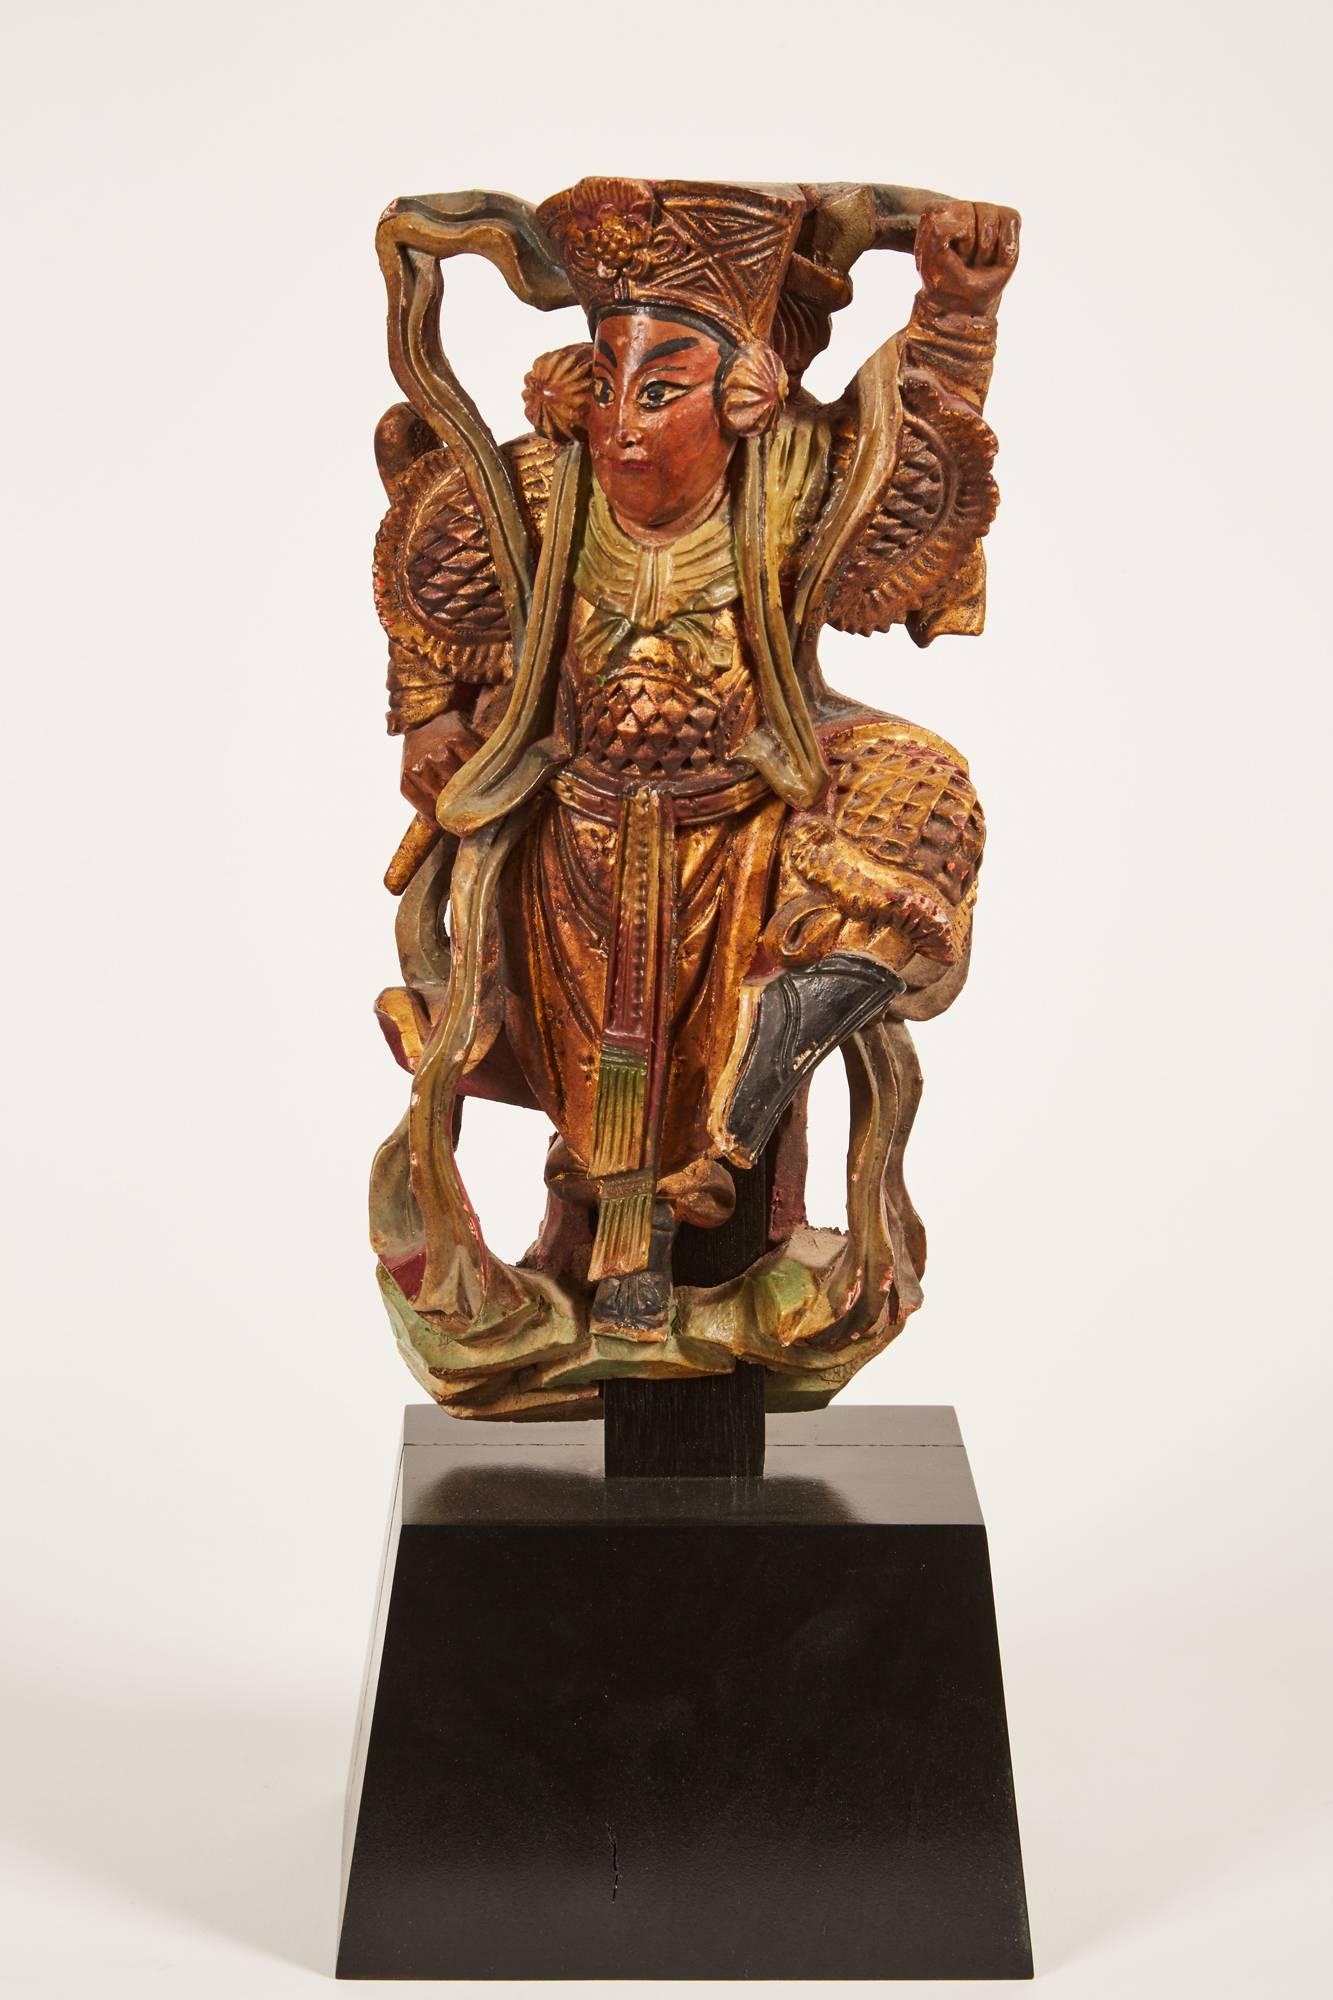 Carved wooden statue of Chinese Deities on stand. One has a long beard which appears to be wrapped and wound around his body in elaborate curling shapes, holding a long sword in his right hand, pointed to the floor. Painted in various shades of